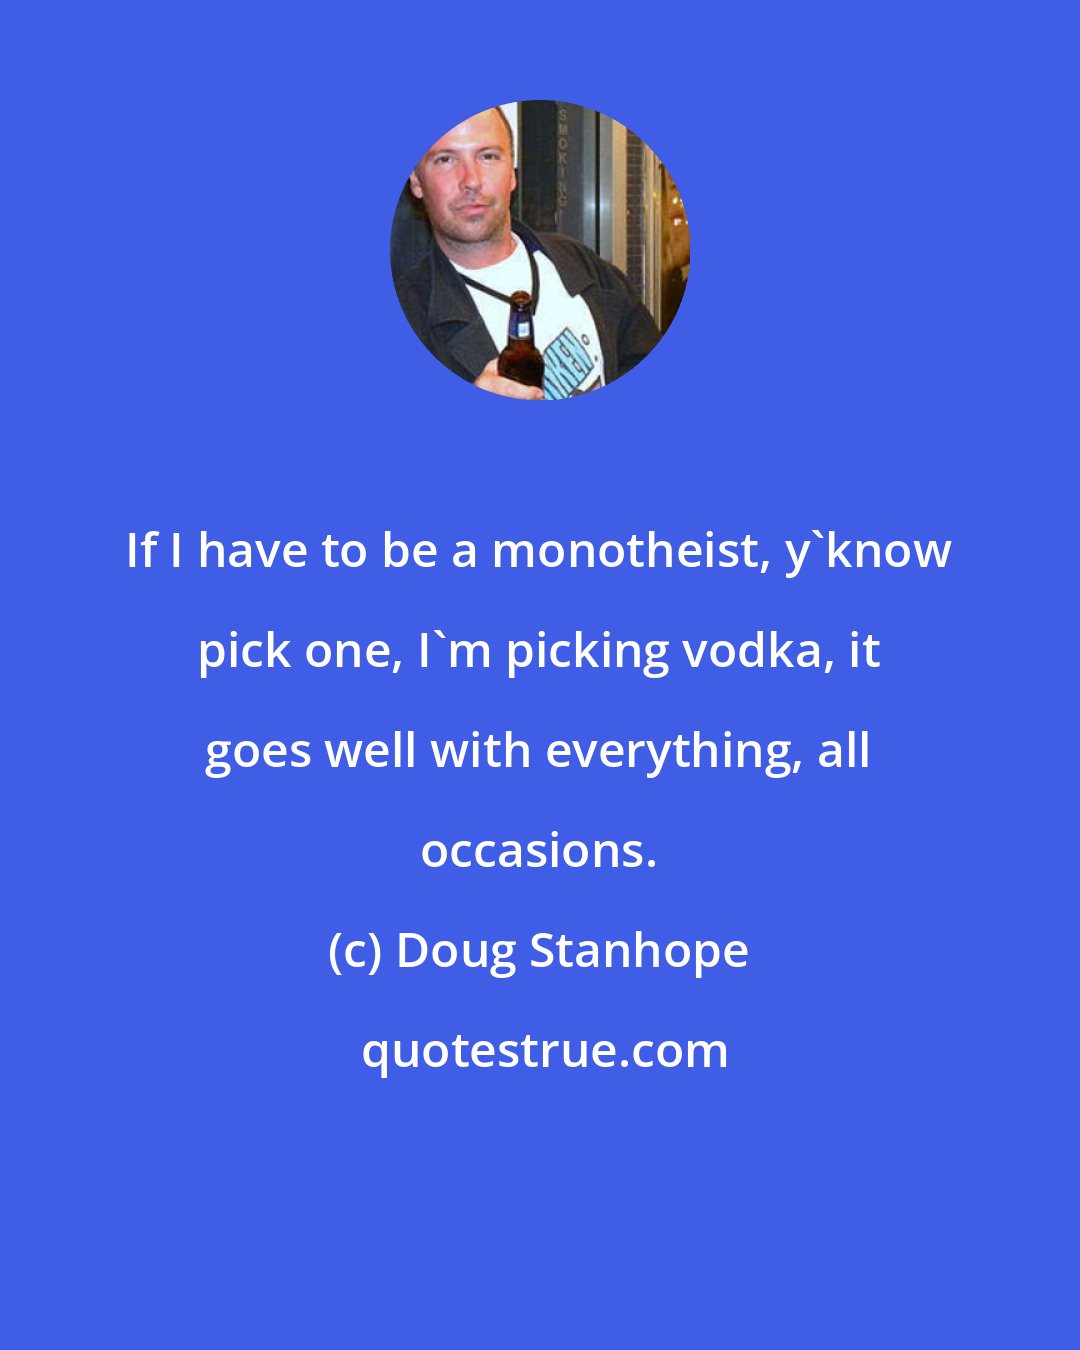 Doug Stanhope: If I have to be a monotheist, y'know pick one, I'm picking vodka, it goes well with everything, all occasions.